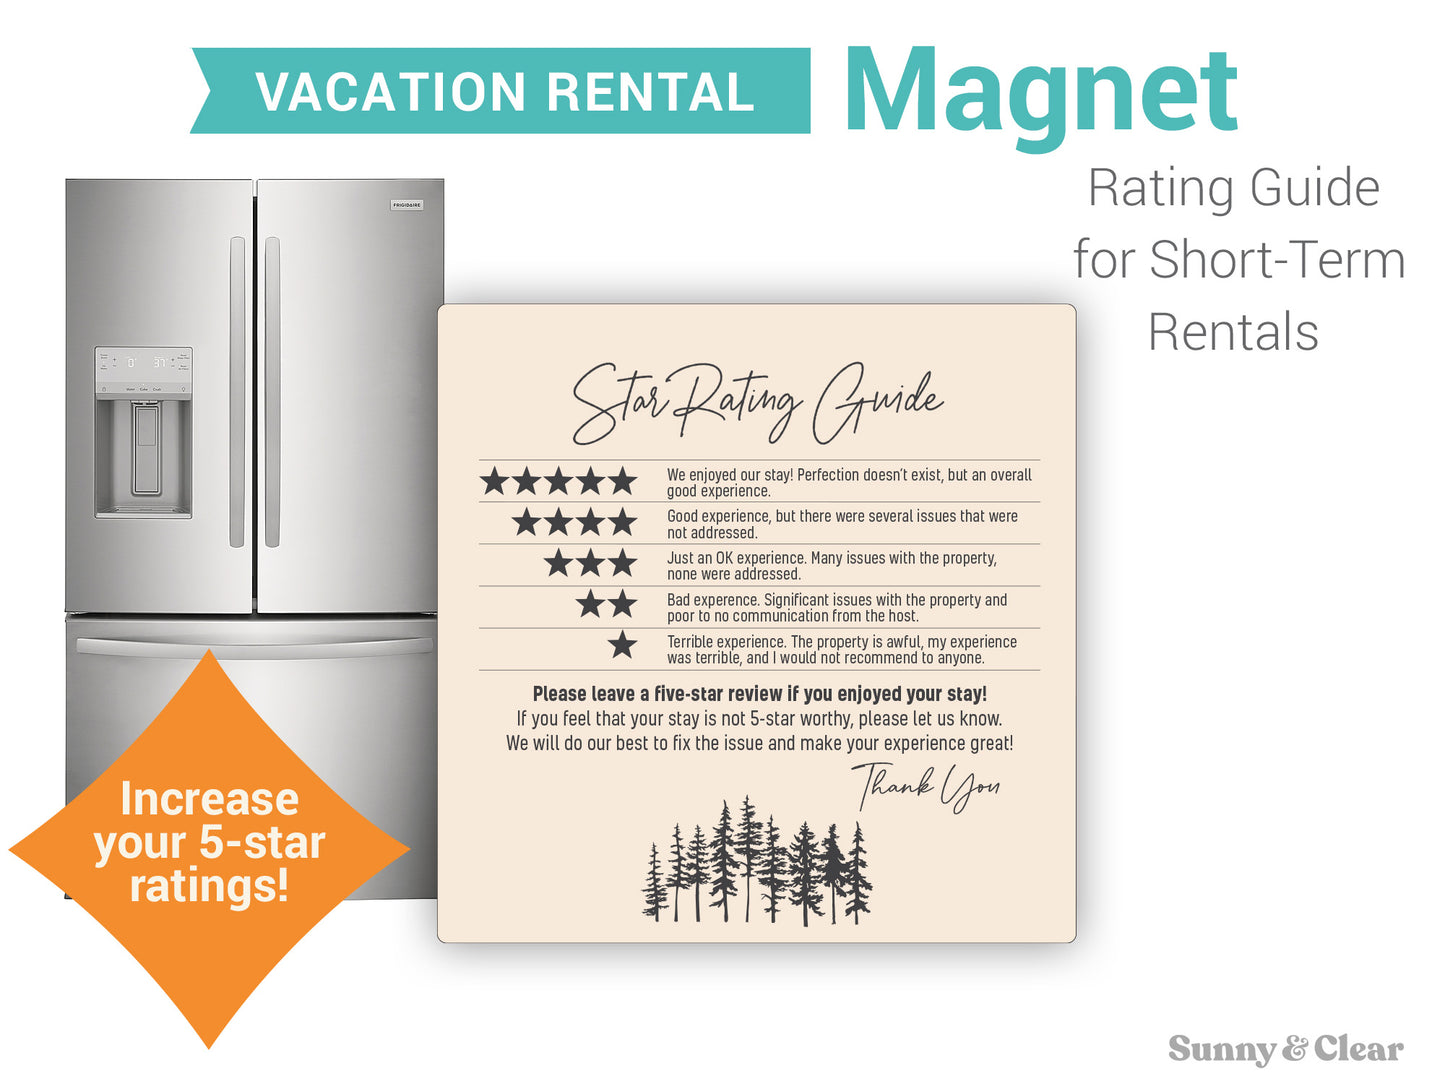 AirBNB Rating Refrigerator Magnet Sign, Tan 5x5 Star Rating Review Guide, Short Term Rental